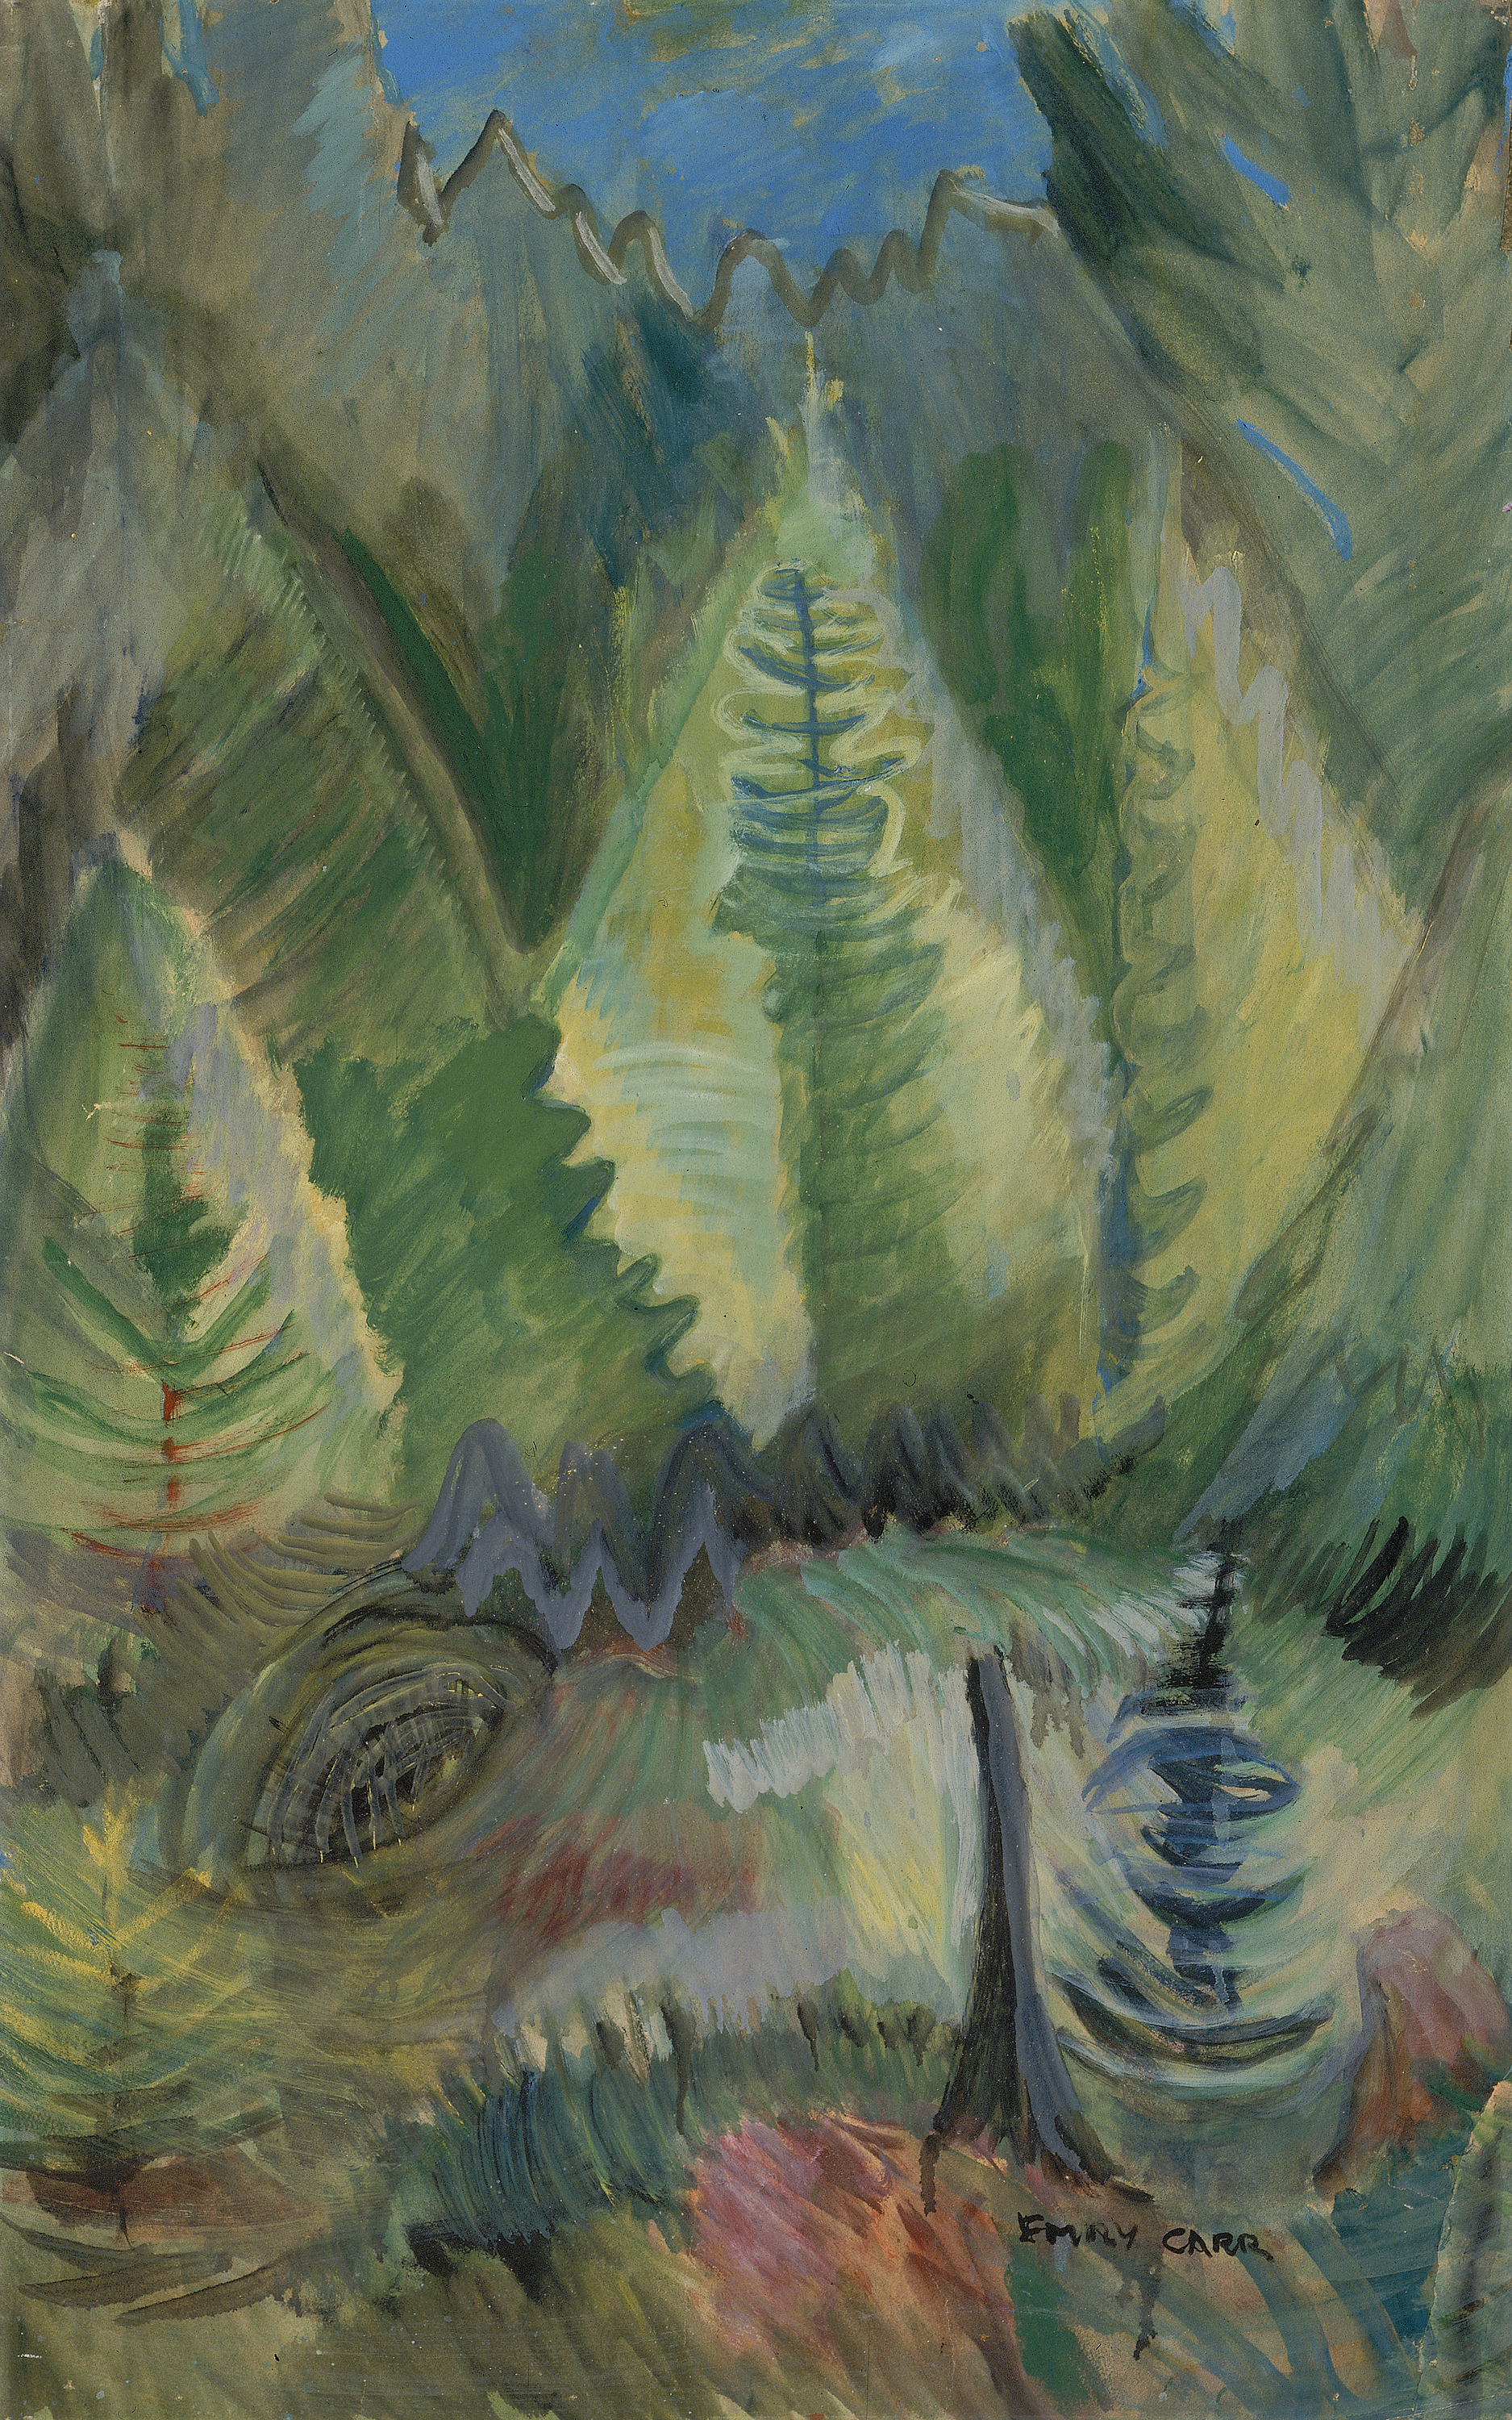 Oil painting that depicts a forest clearing in the foreground with triangular trees behind.